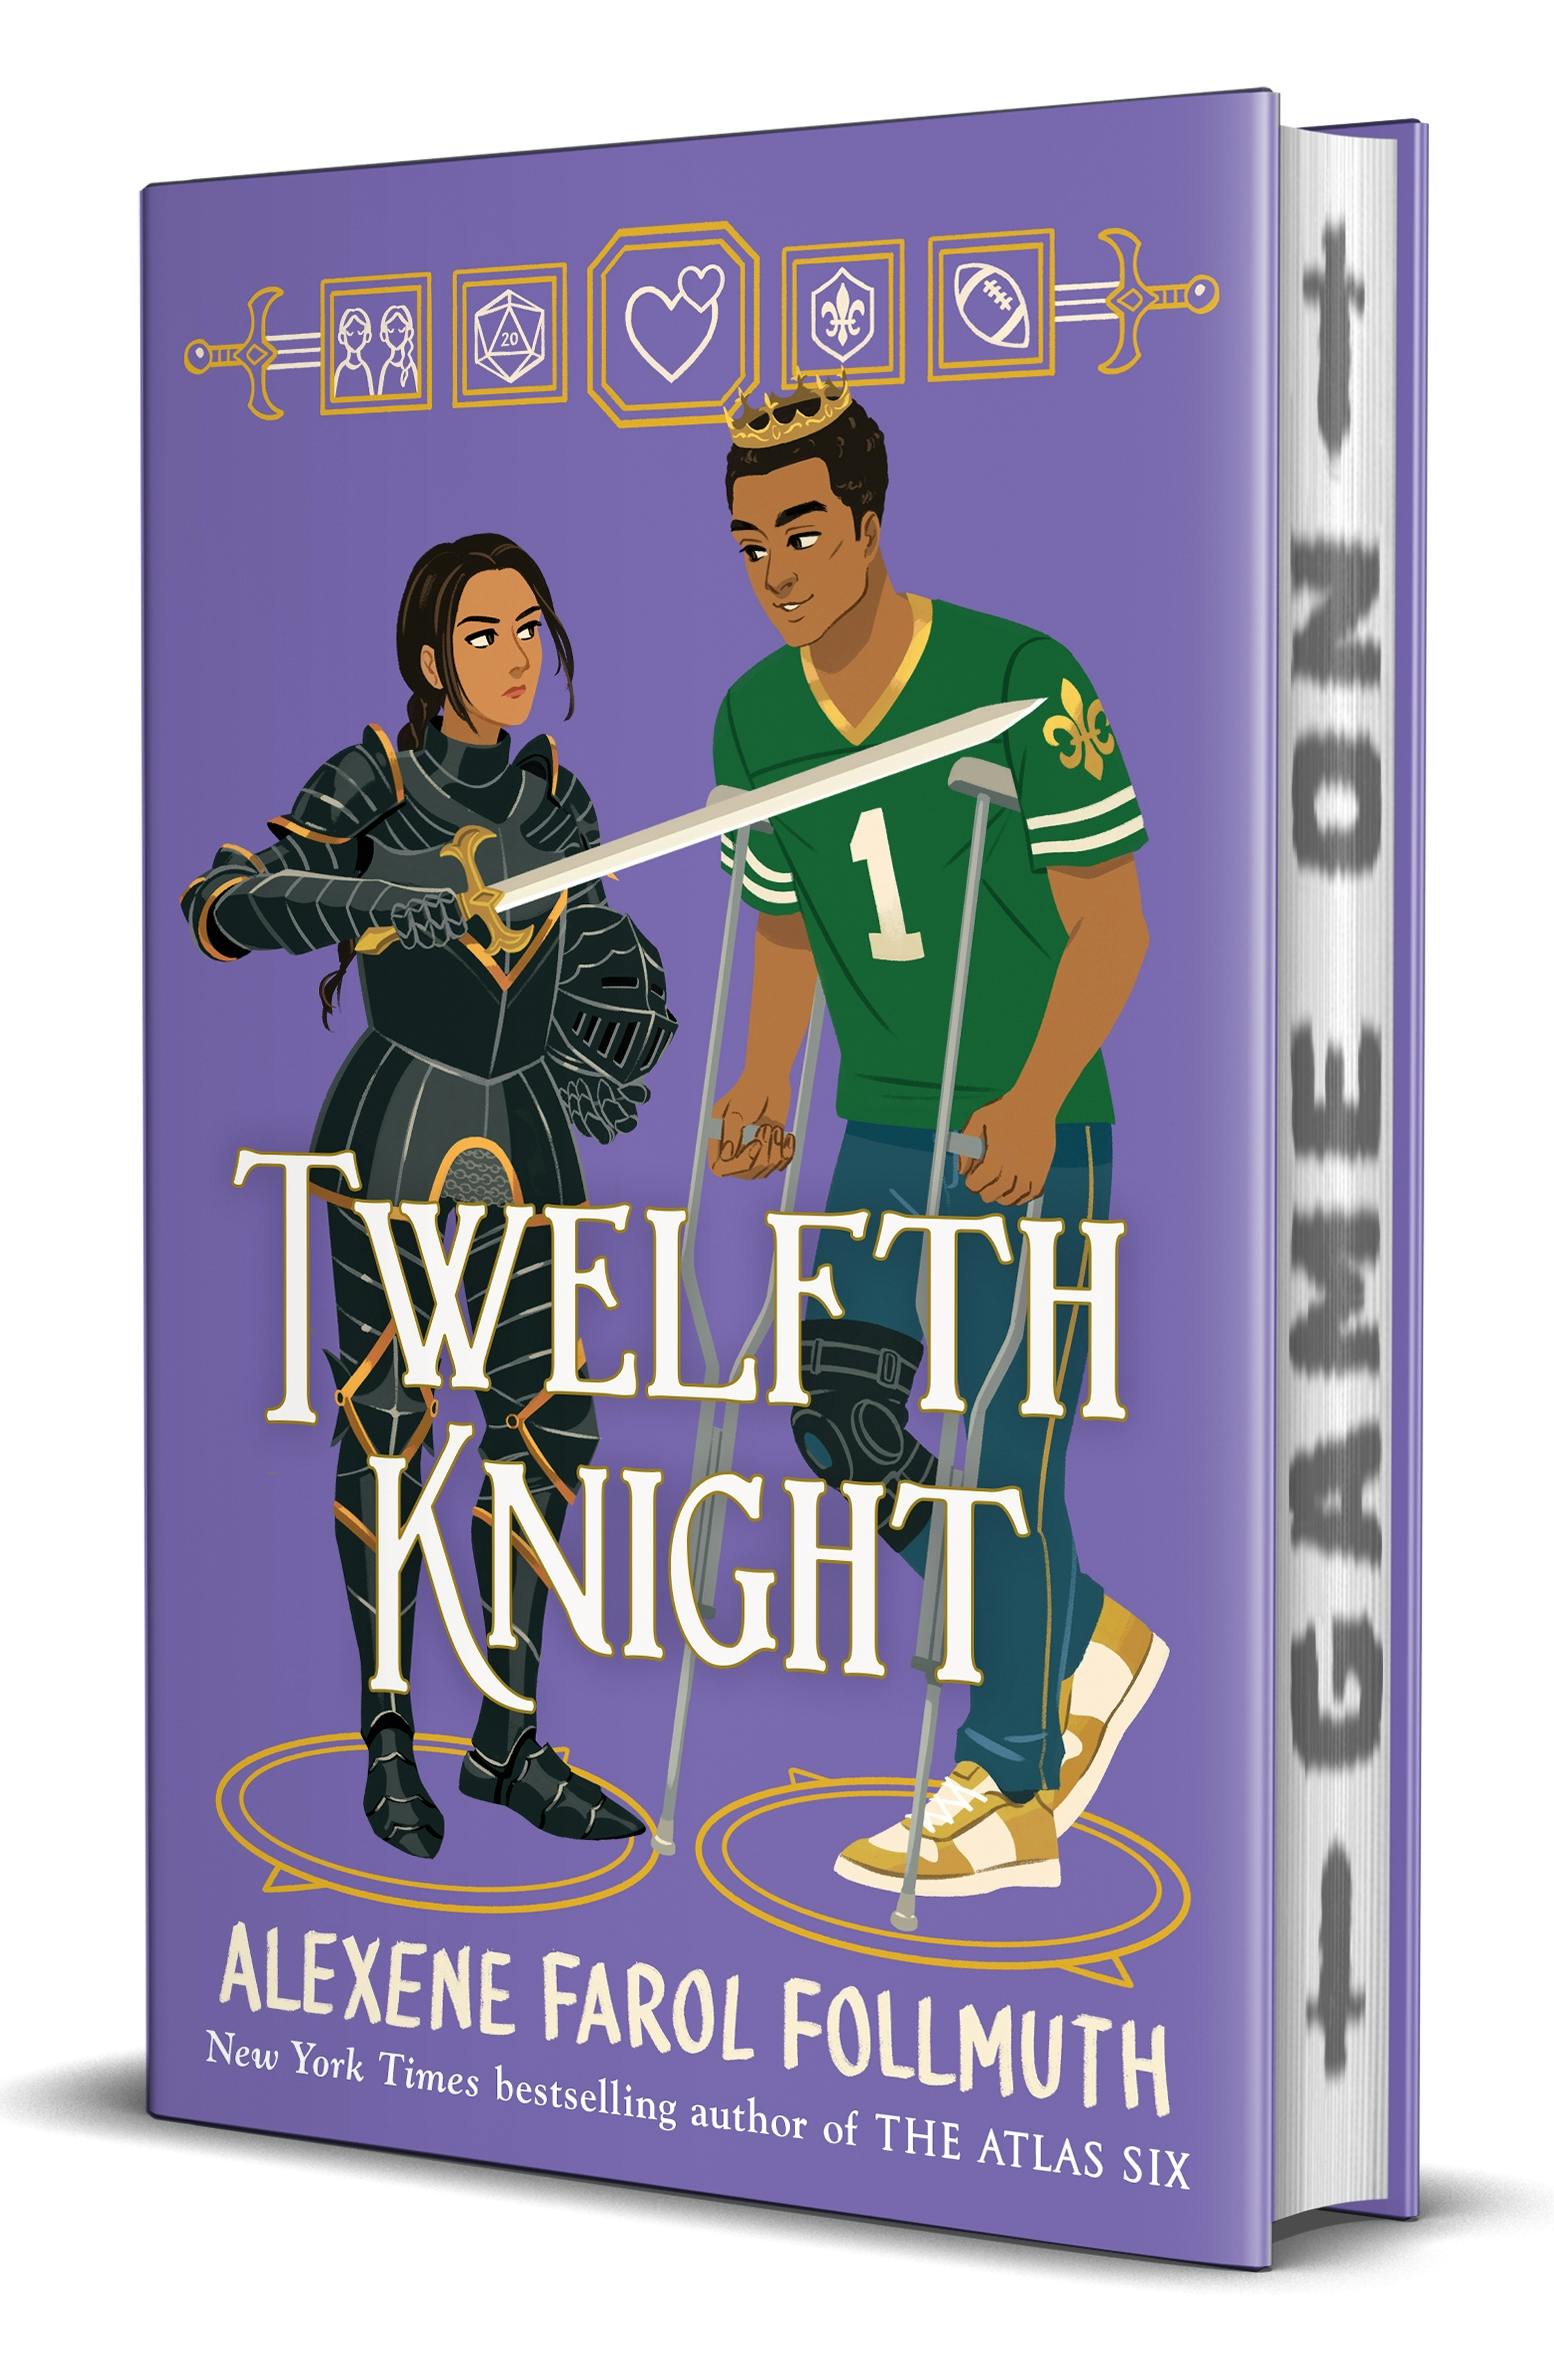 Cover for the book titled as: Twelfth Knight